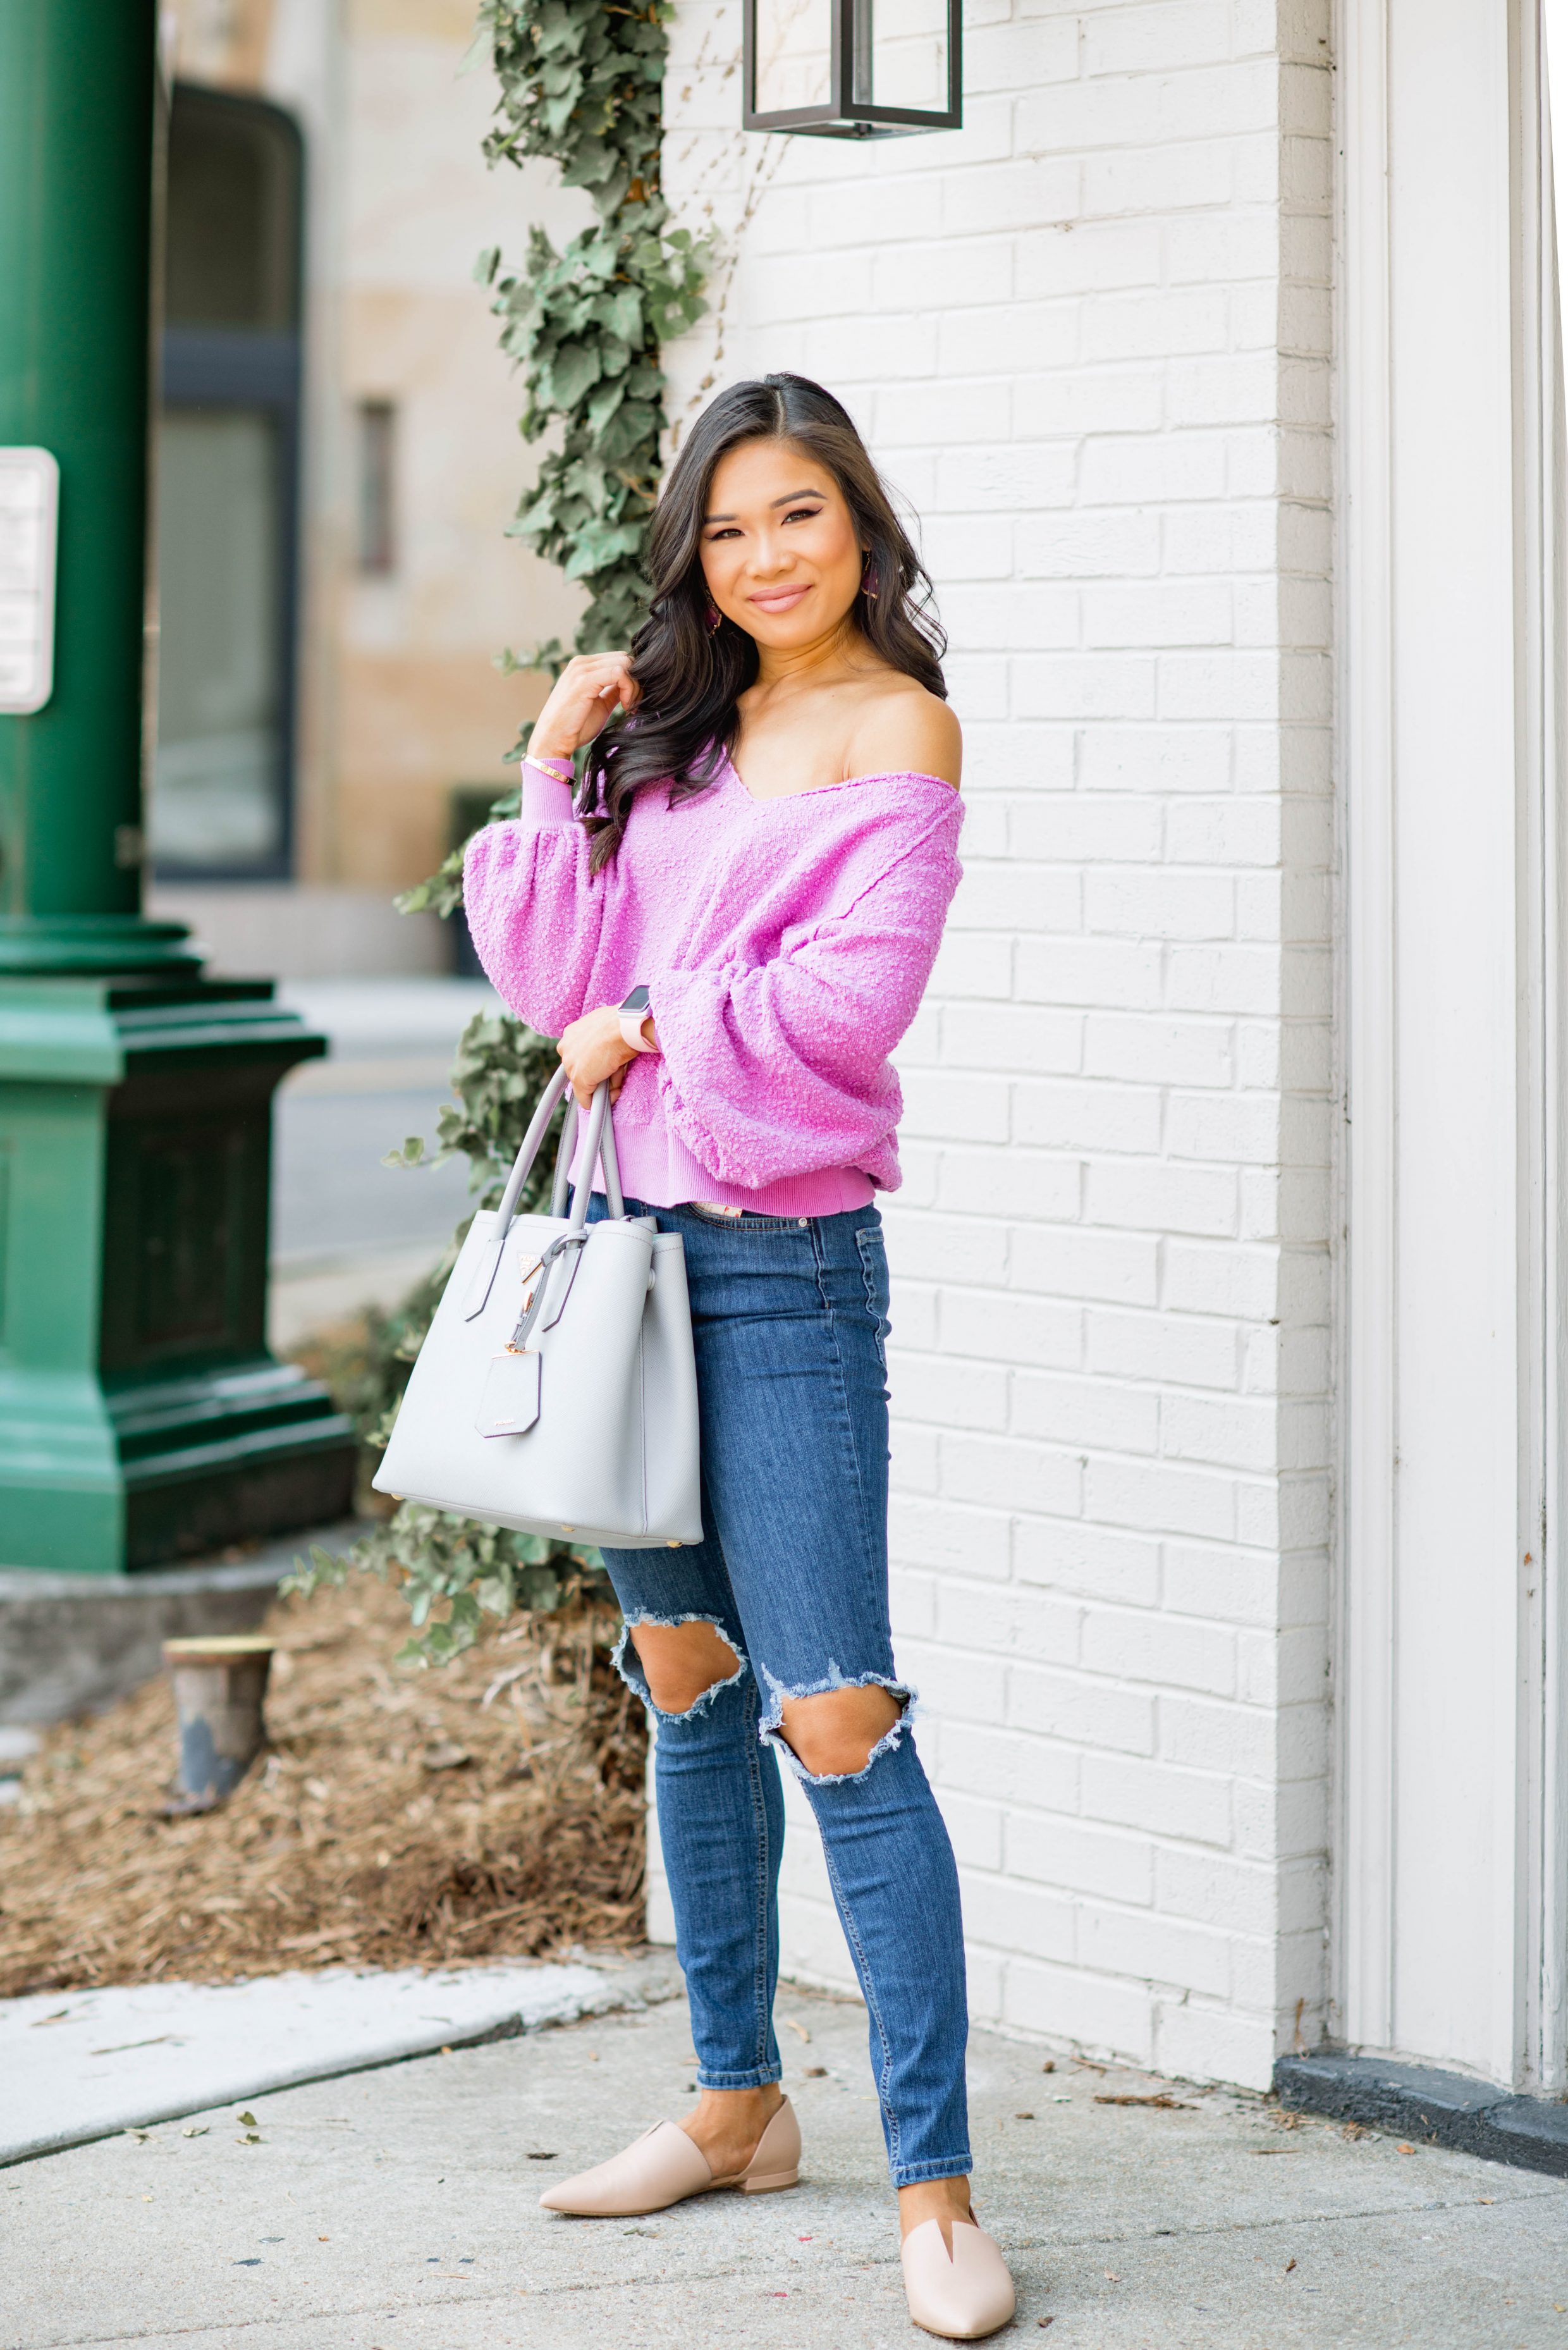 Slouchy sweater and jeans for an easy summer or fall look